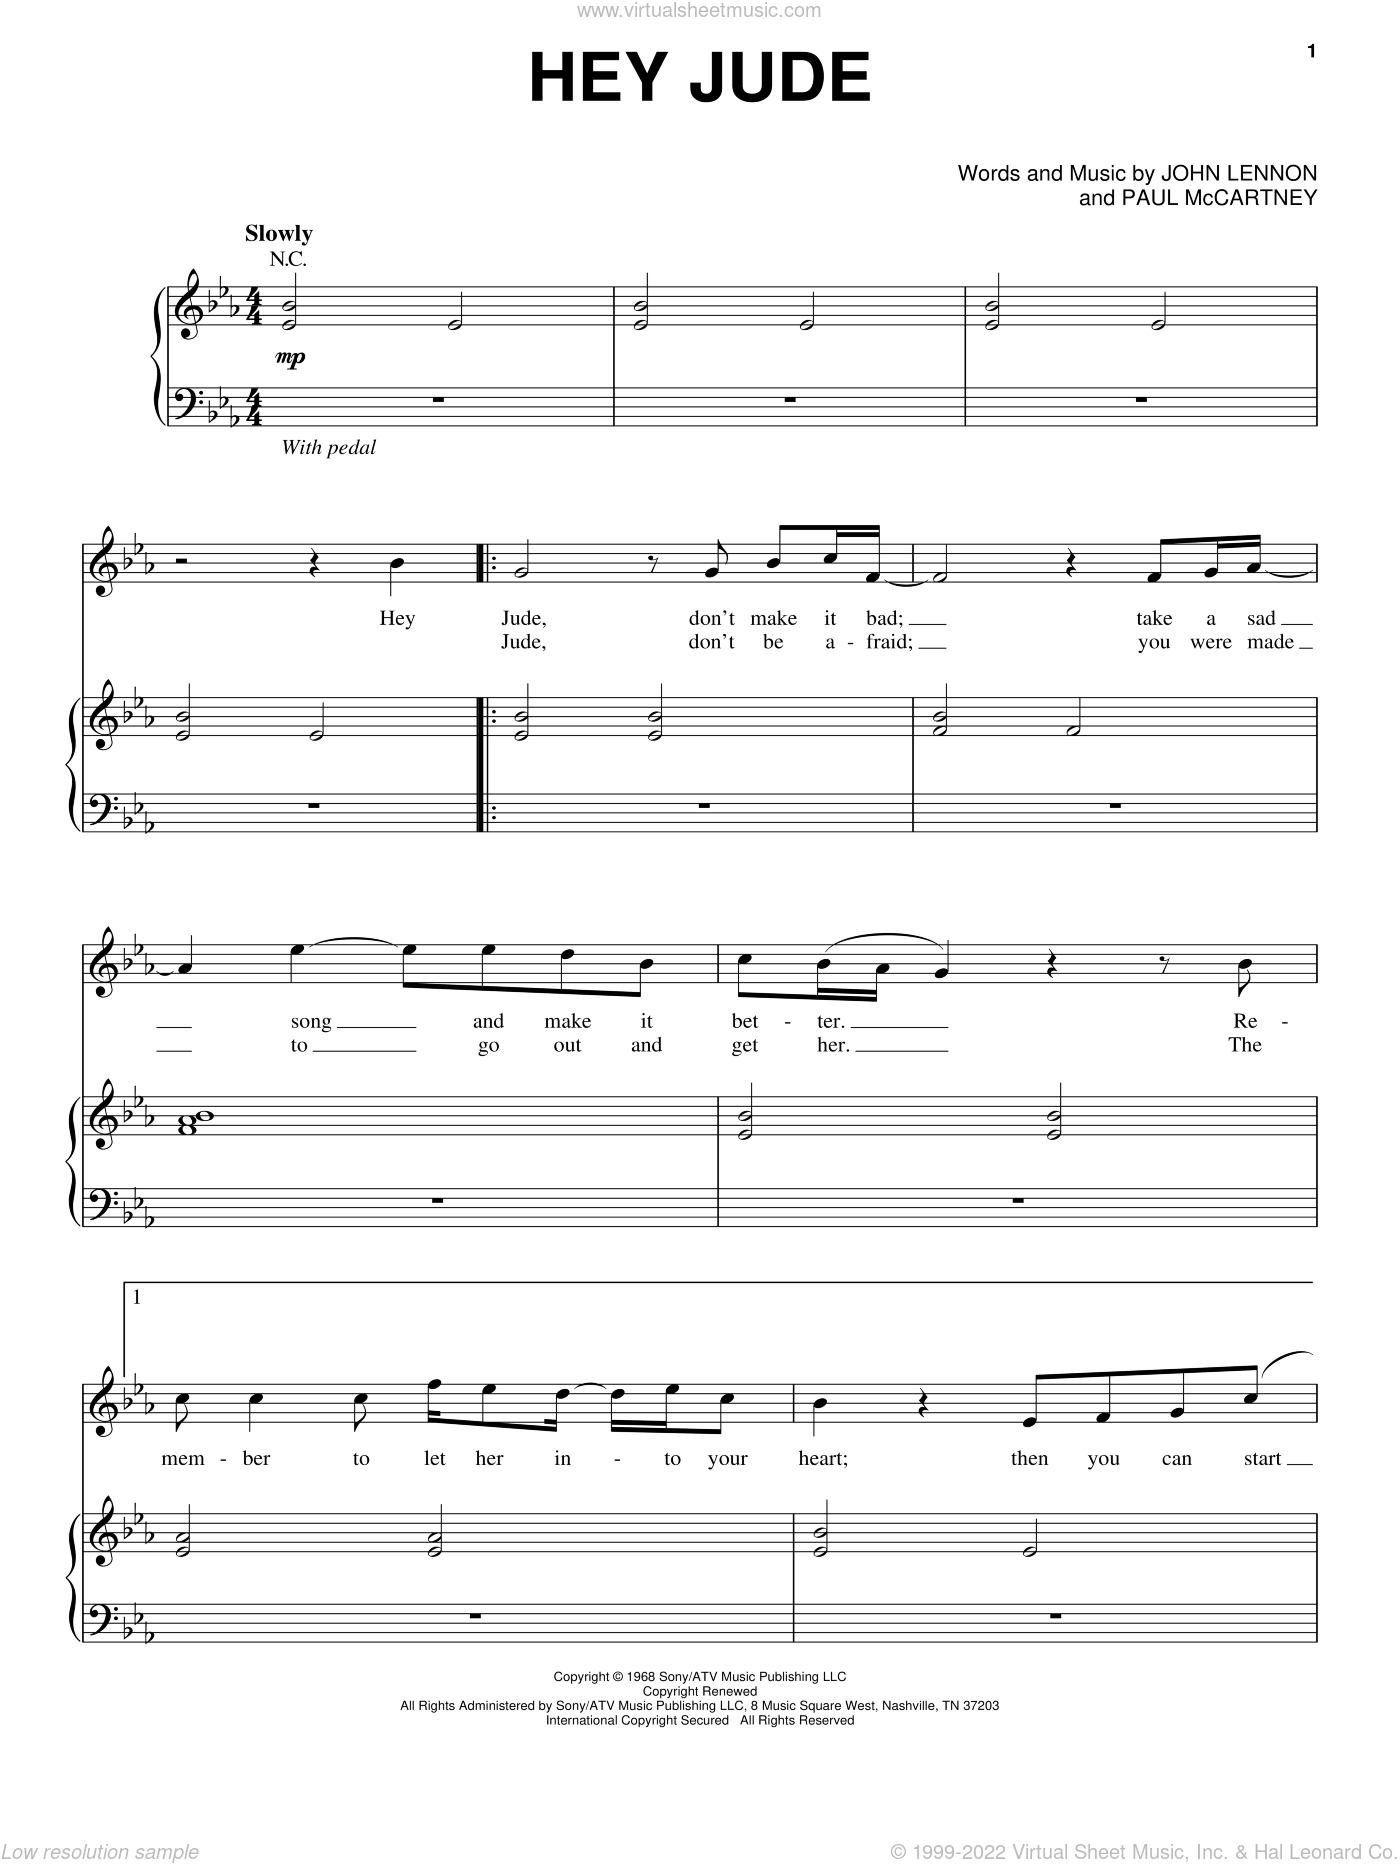 Beatles - Hey Jude sheet music for voice and piano [PDF]